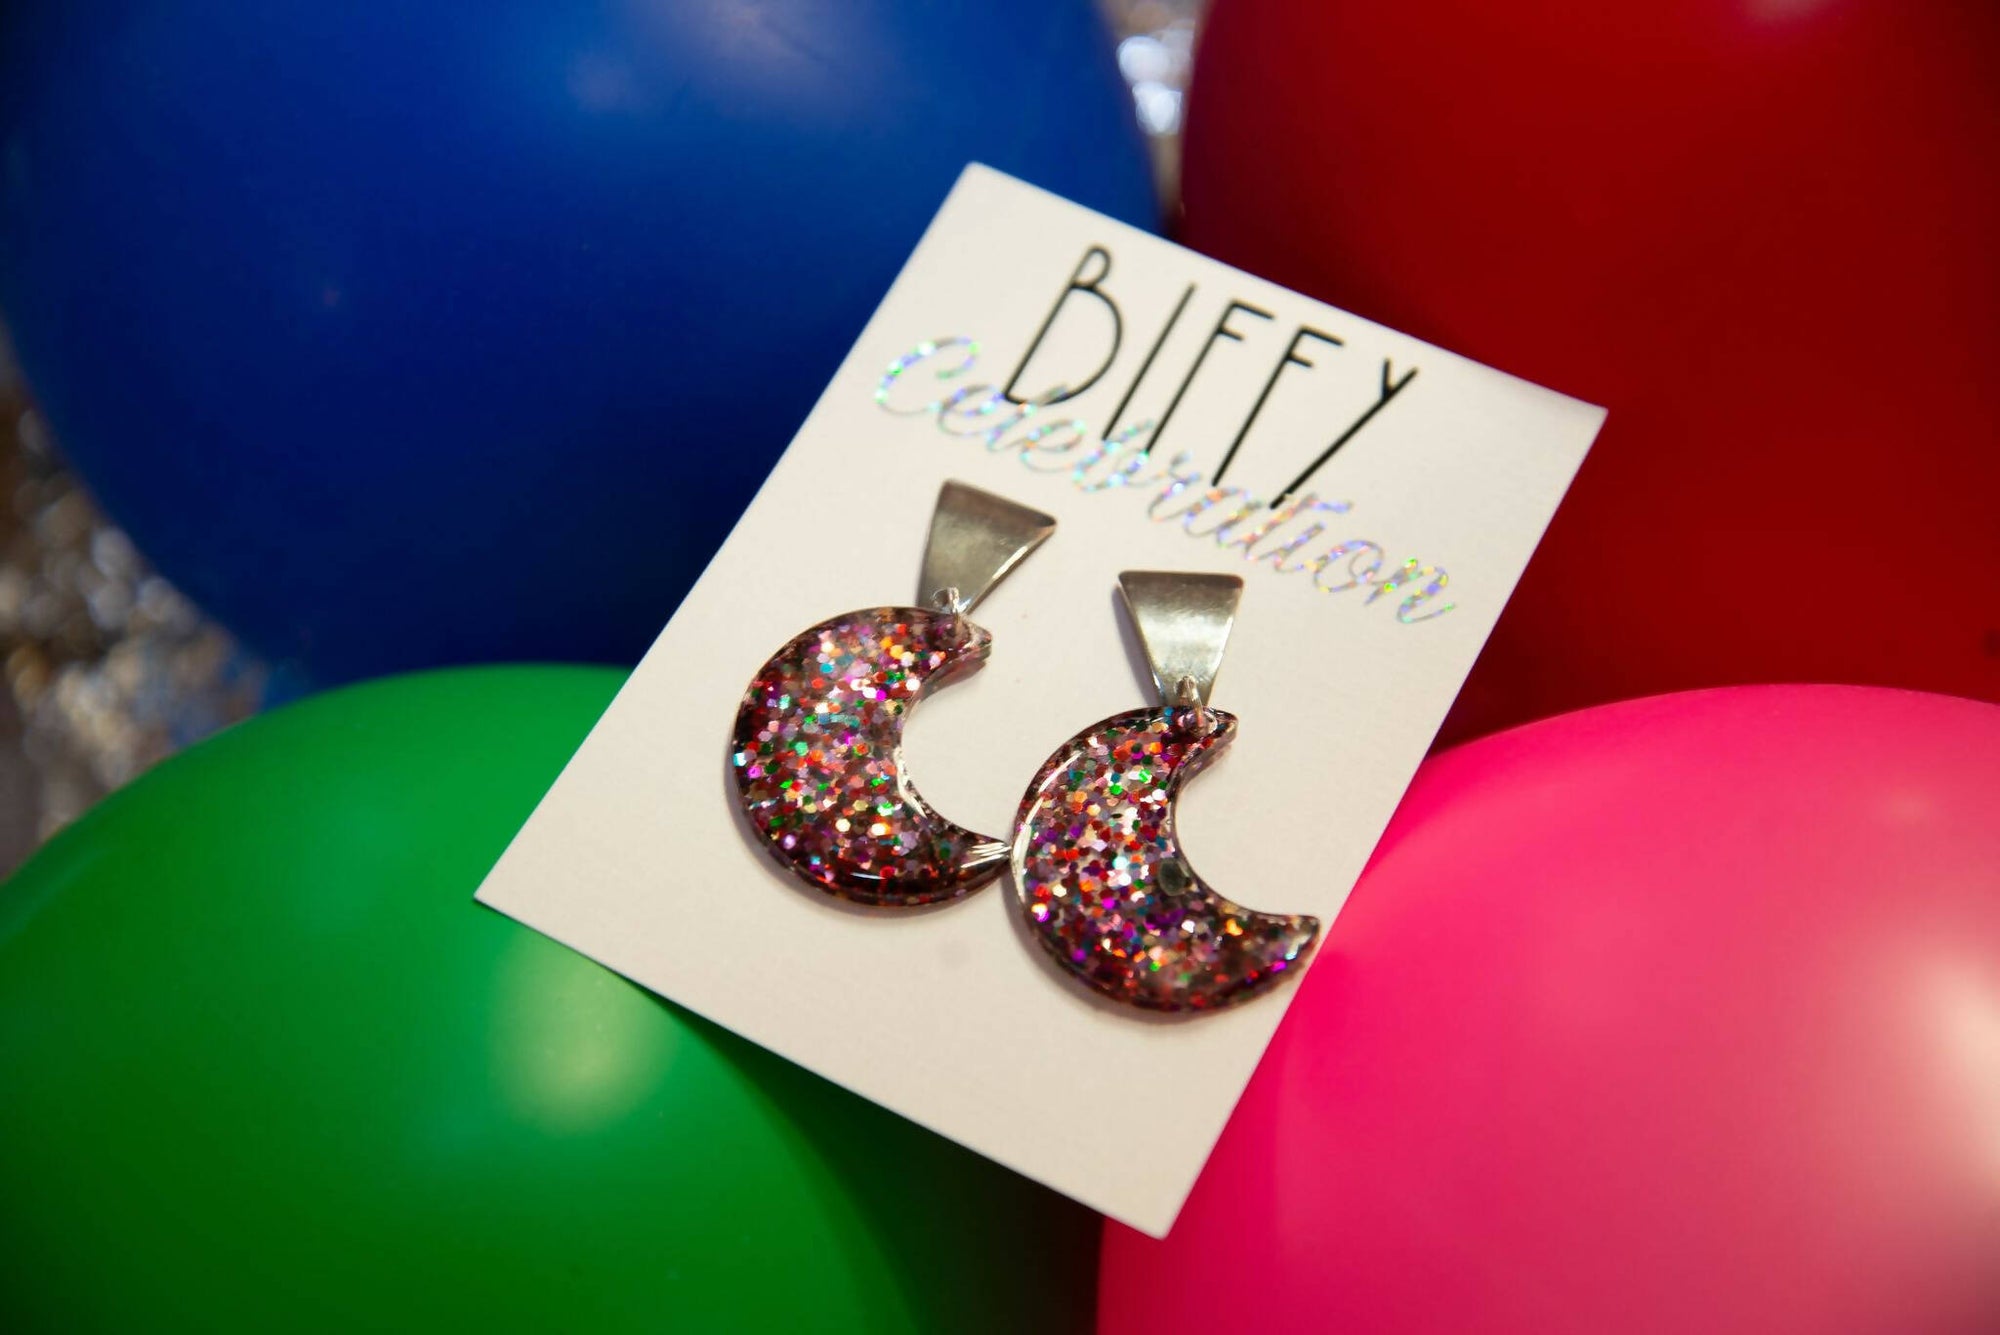 Party Celebration Resin Earrings, Sequin Glitter, Geometric Shapes, Moon, on biffy earring card, on balloon, top view